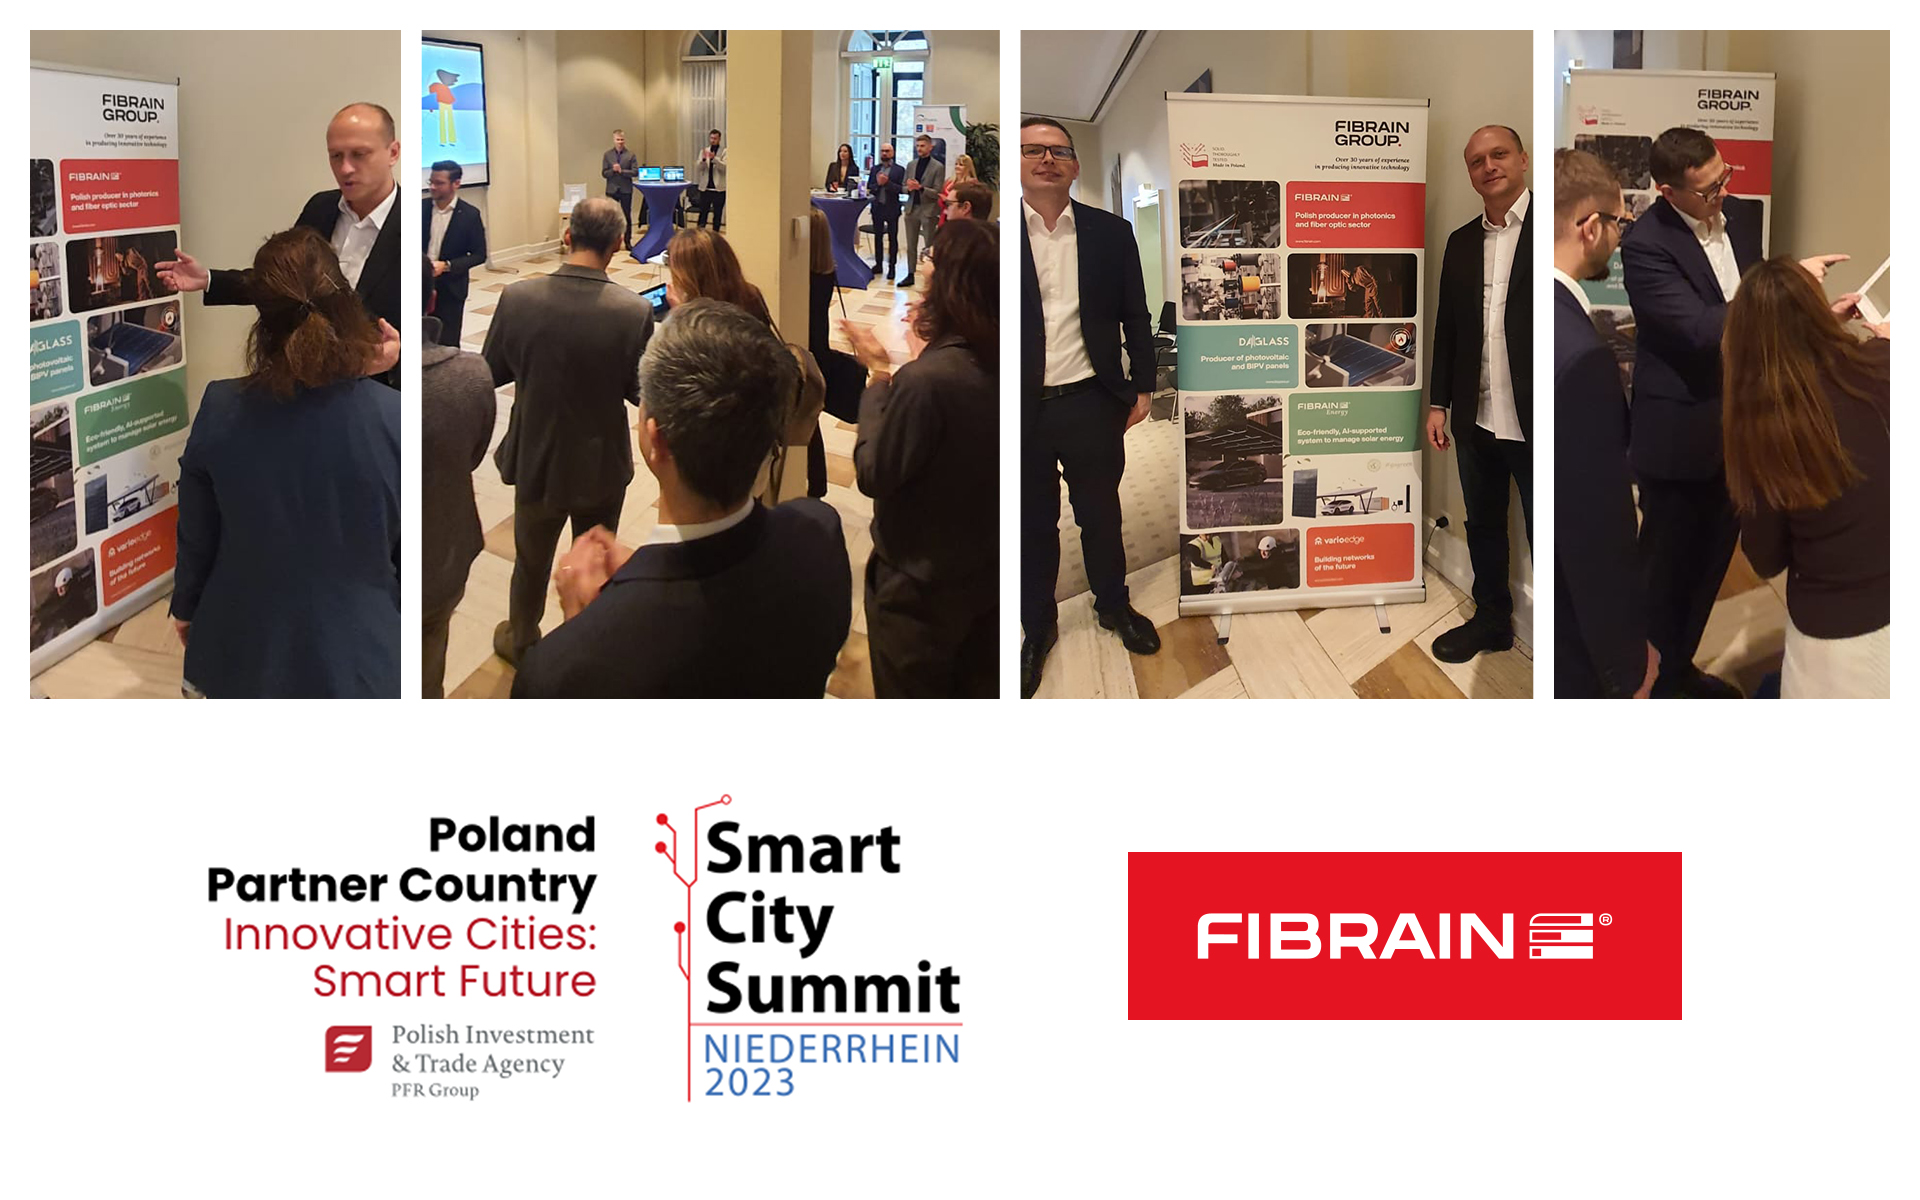 FIBRAIN took part in the SmartCity Summit Country Partner Pre Event!